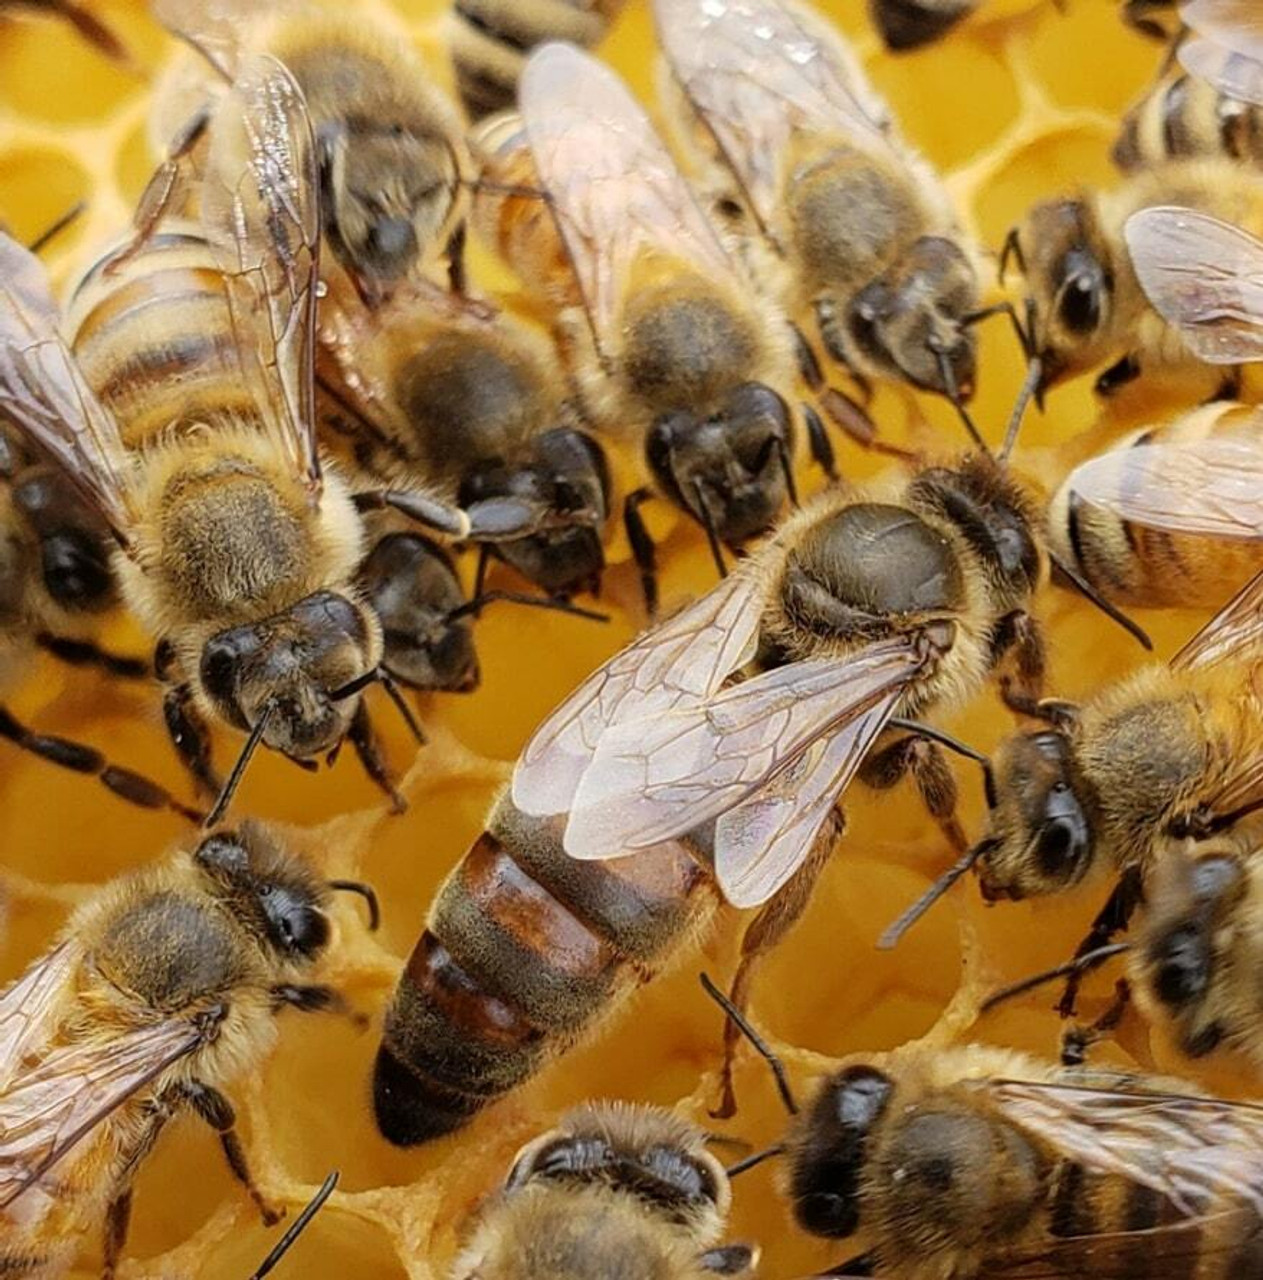 Russian Queen Honey Bees For Sale Free Shipping in Iowa USA Lappe's